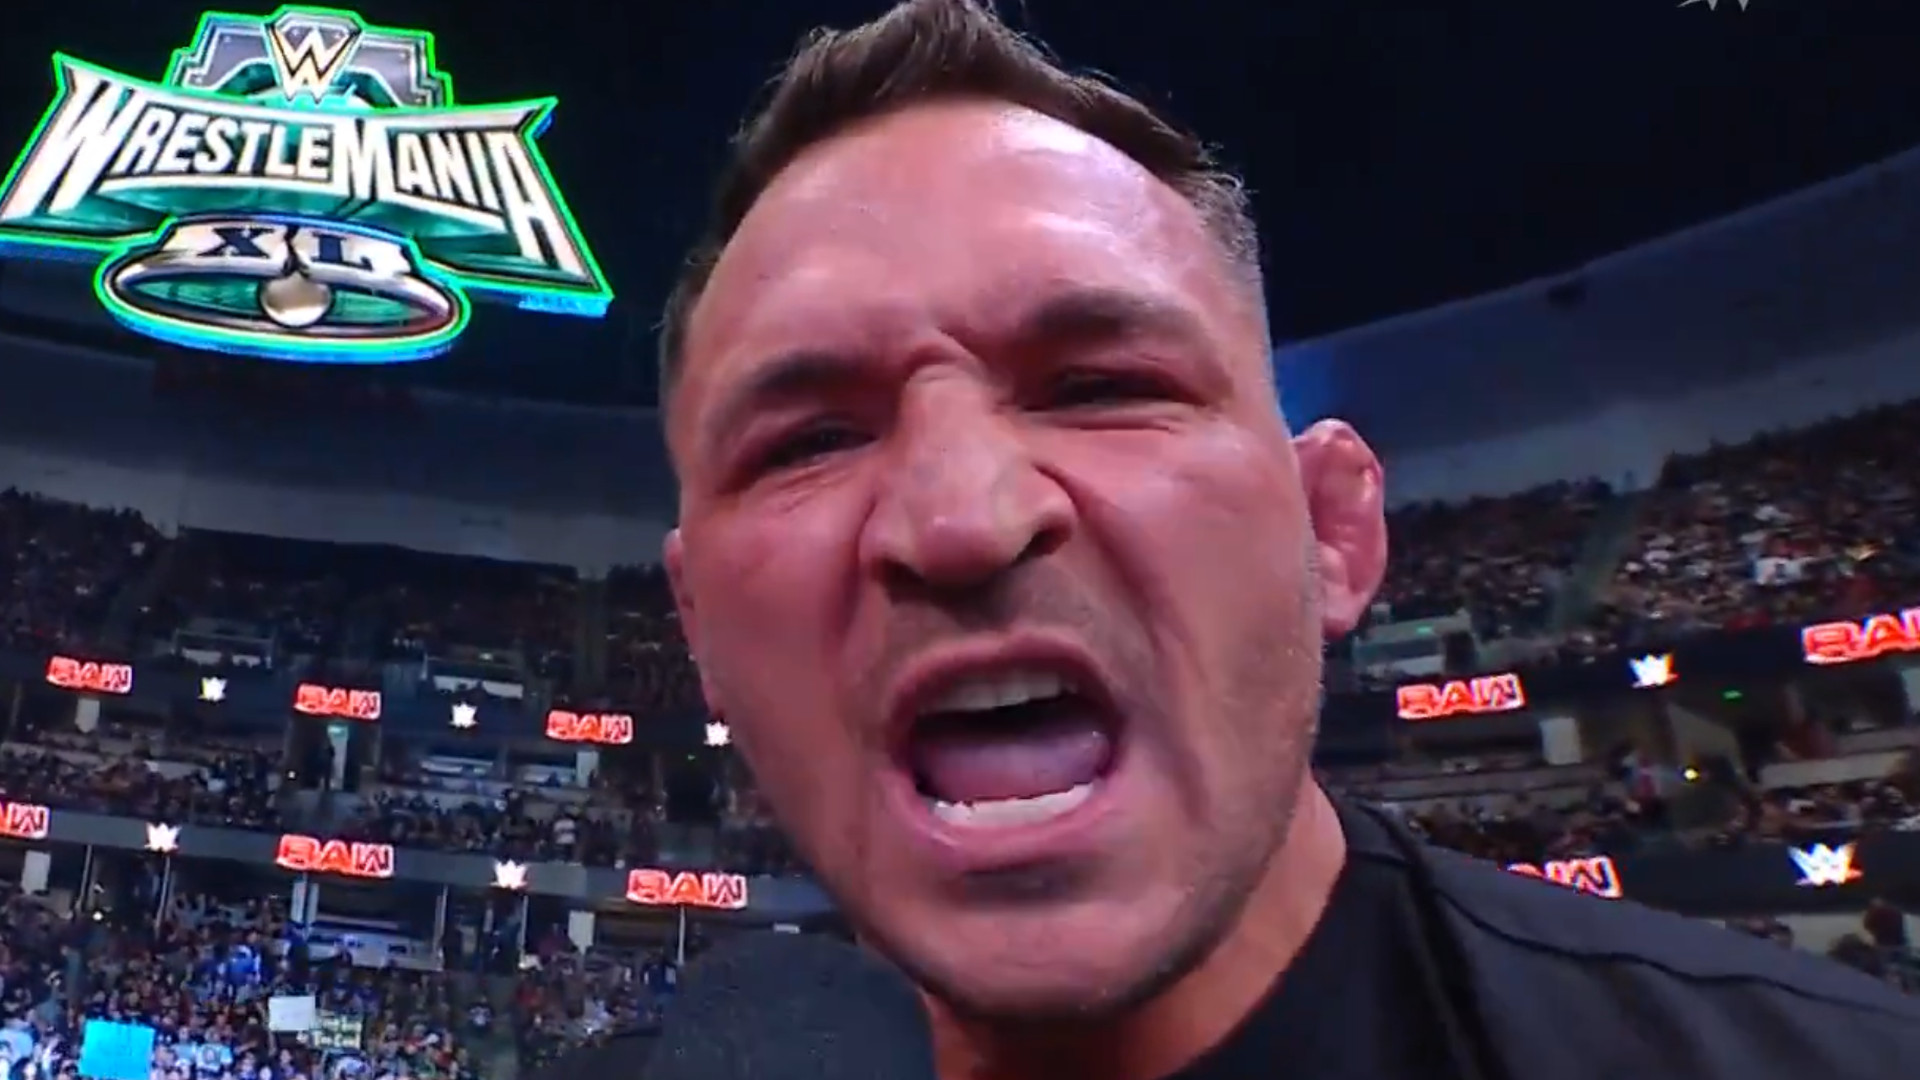 michael chandler explains wwe promo against conor mcgregor: ‘i was thrown into the fire’